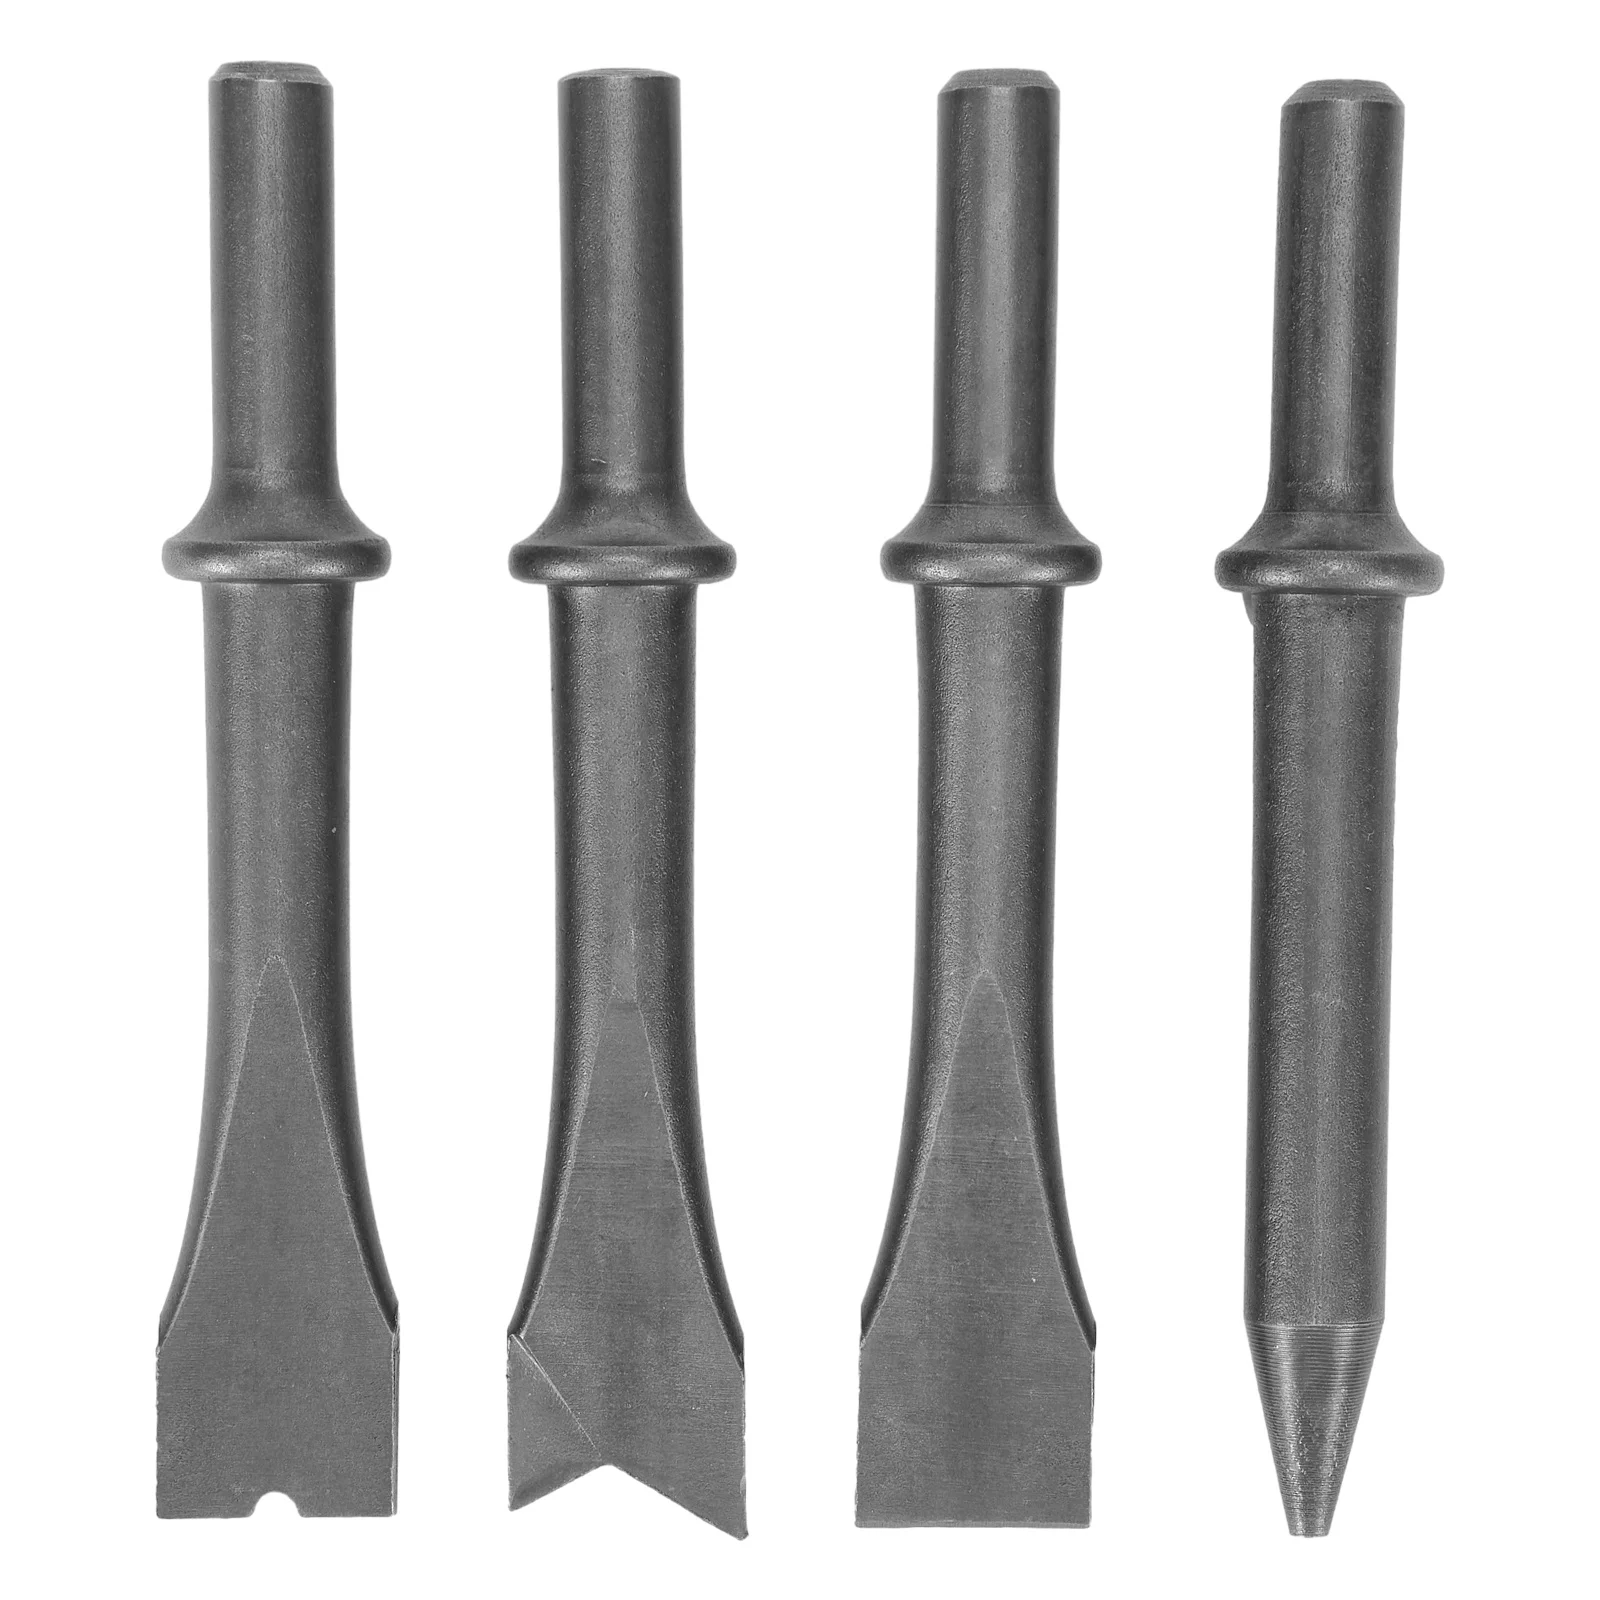 

4PCS 120mm Air Chisel Shovel Head For Air Hammer Shovels Rust Remover Cutting Pneumatic Tool Air Chisel Replacement Parts